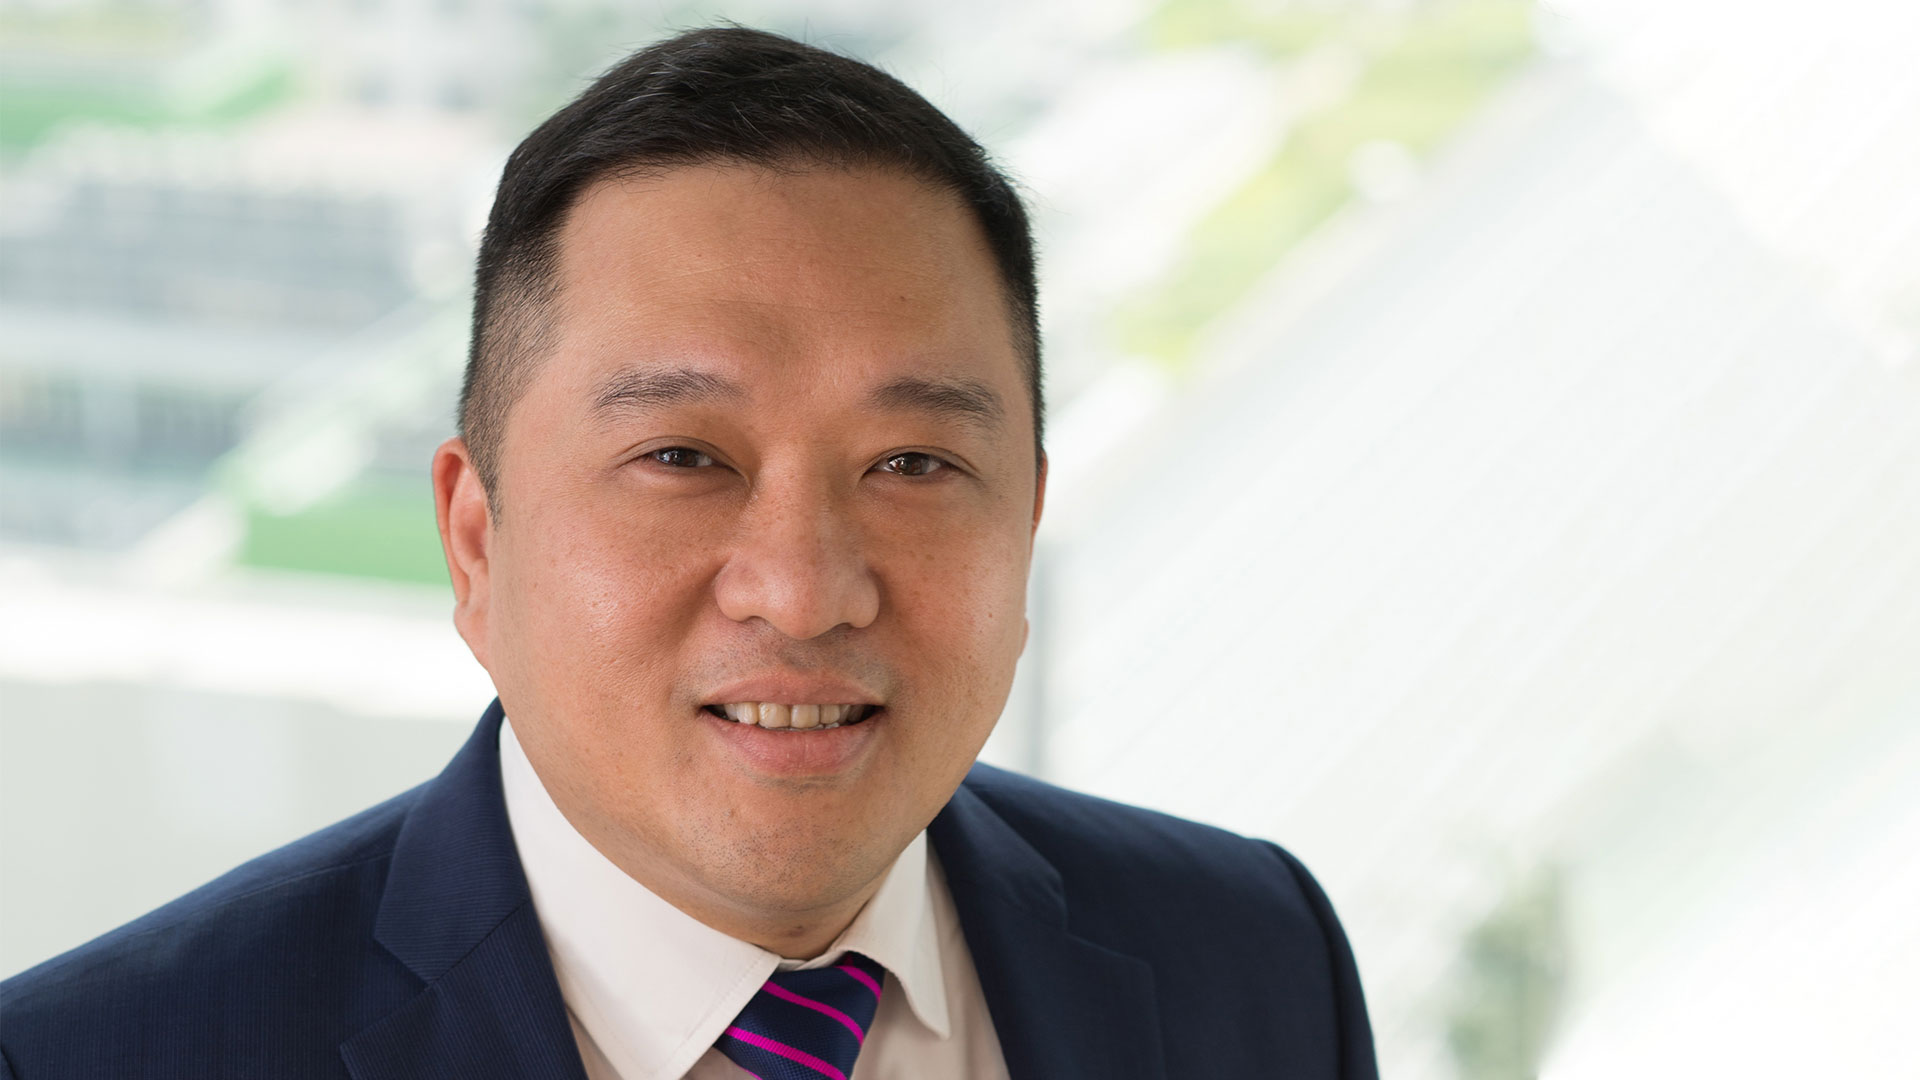 Kee Joo Wong, Regional Head of Global Liquidity and Cash Management, HSBC Asia Pacific